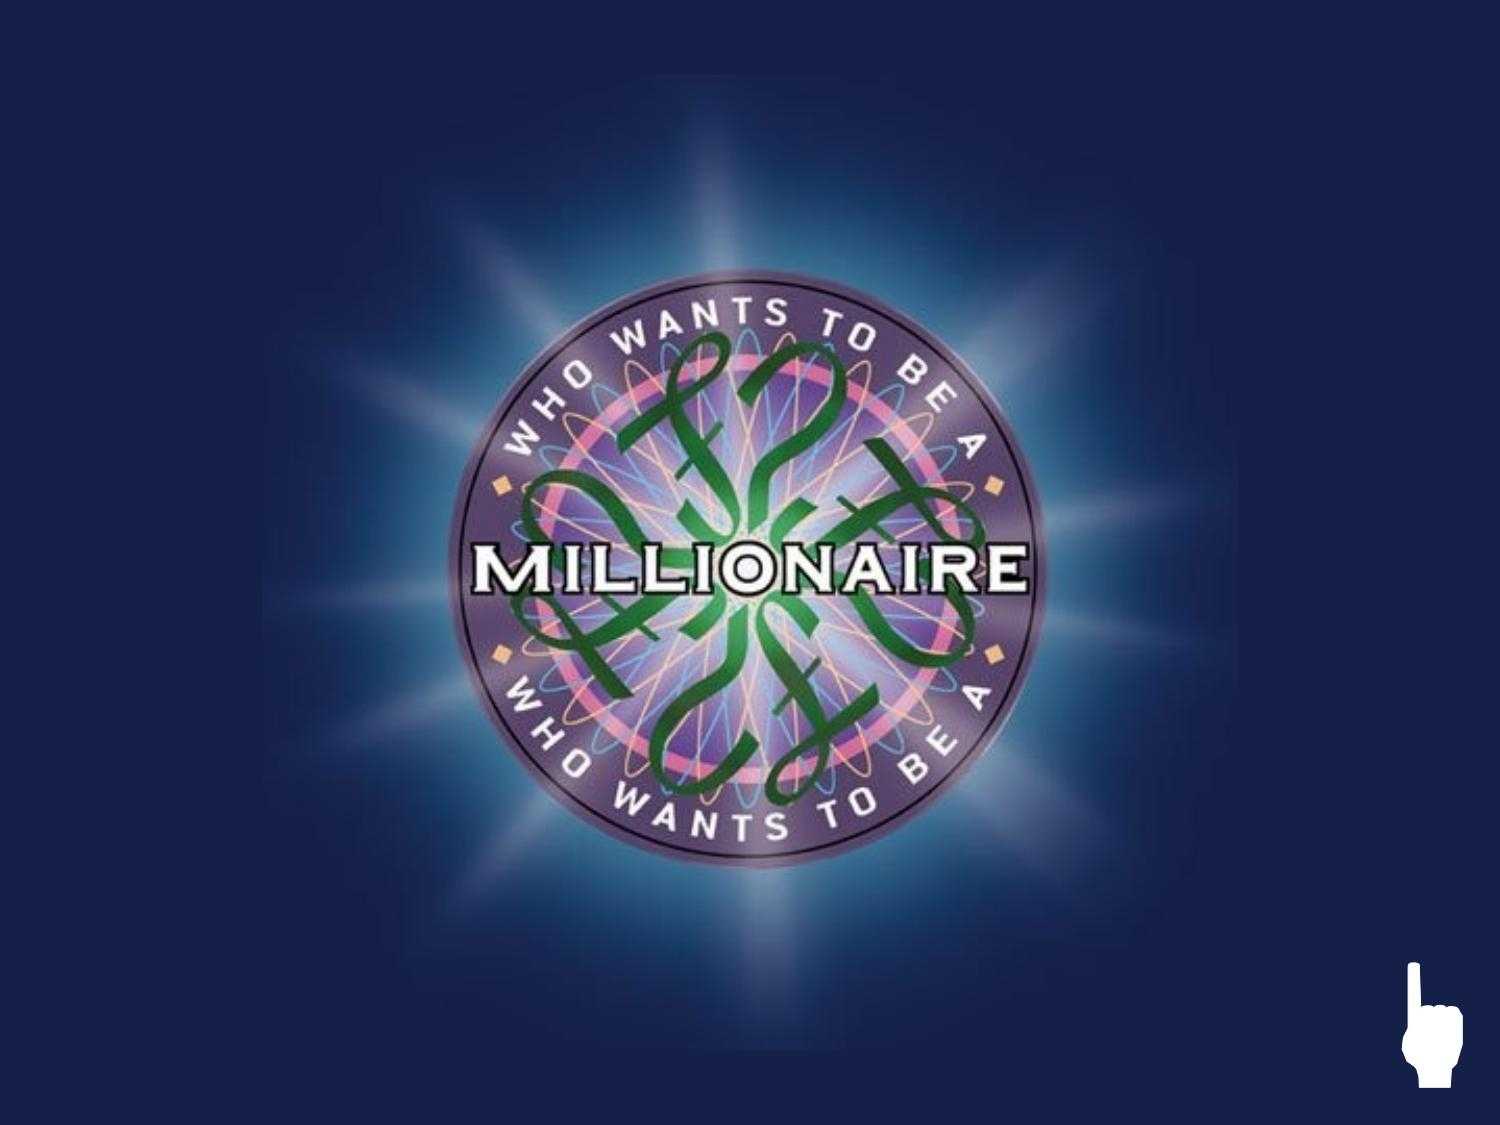 Who Wants To Be A Millionaire Powerpointdanielpanam – Issuu With Who Wants To Be A Millionaire Powerpoint Template